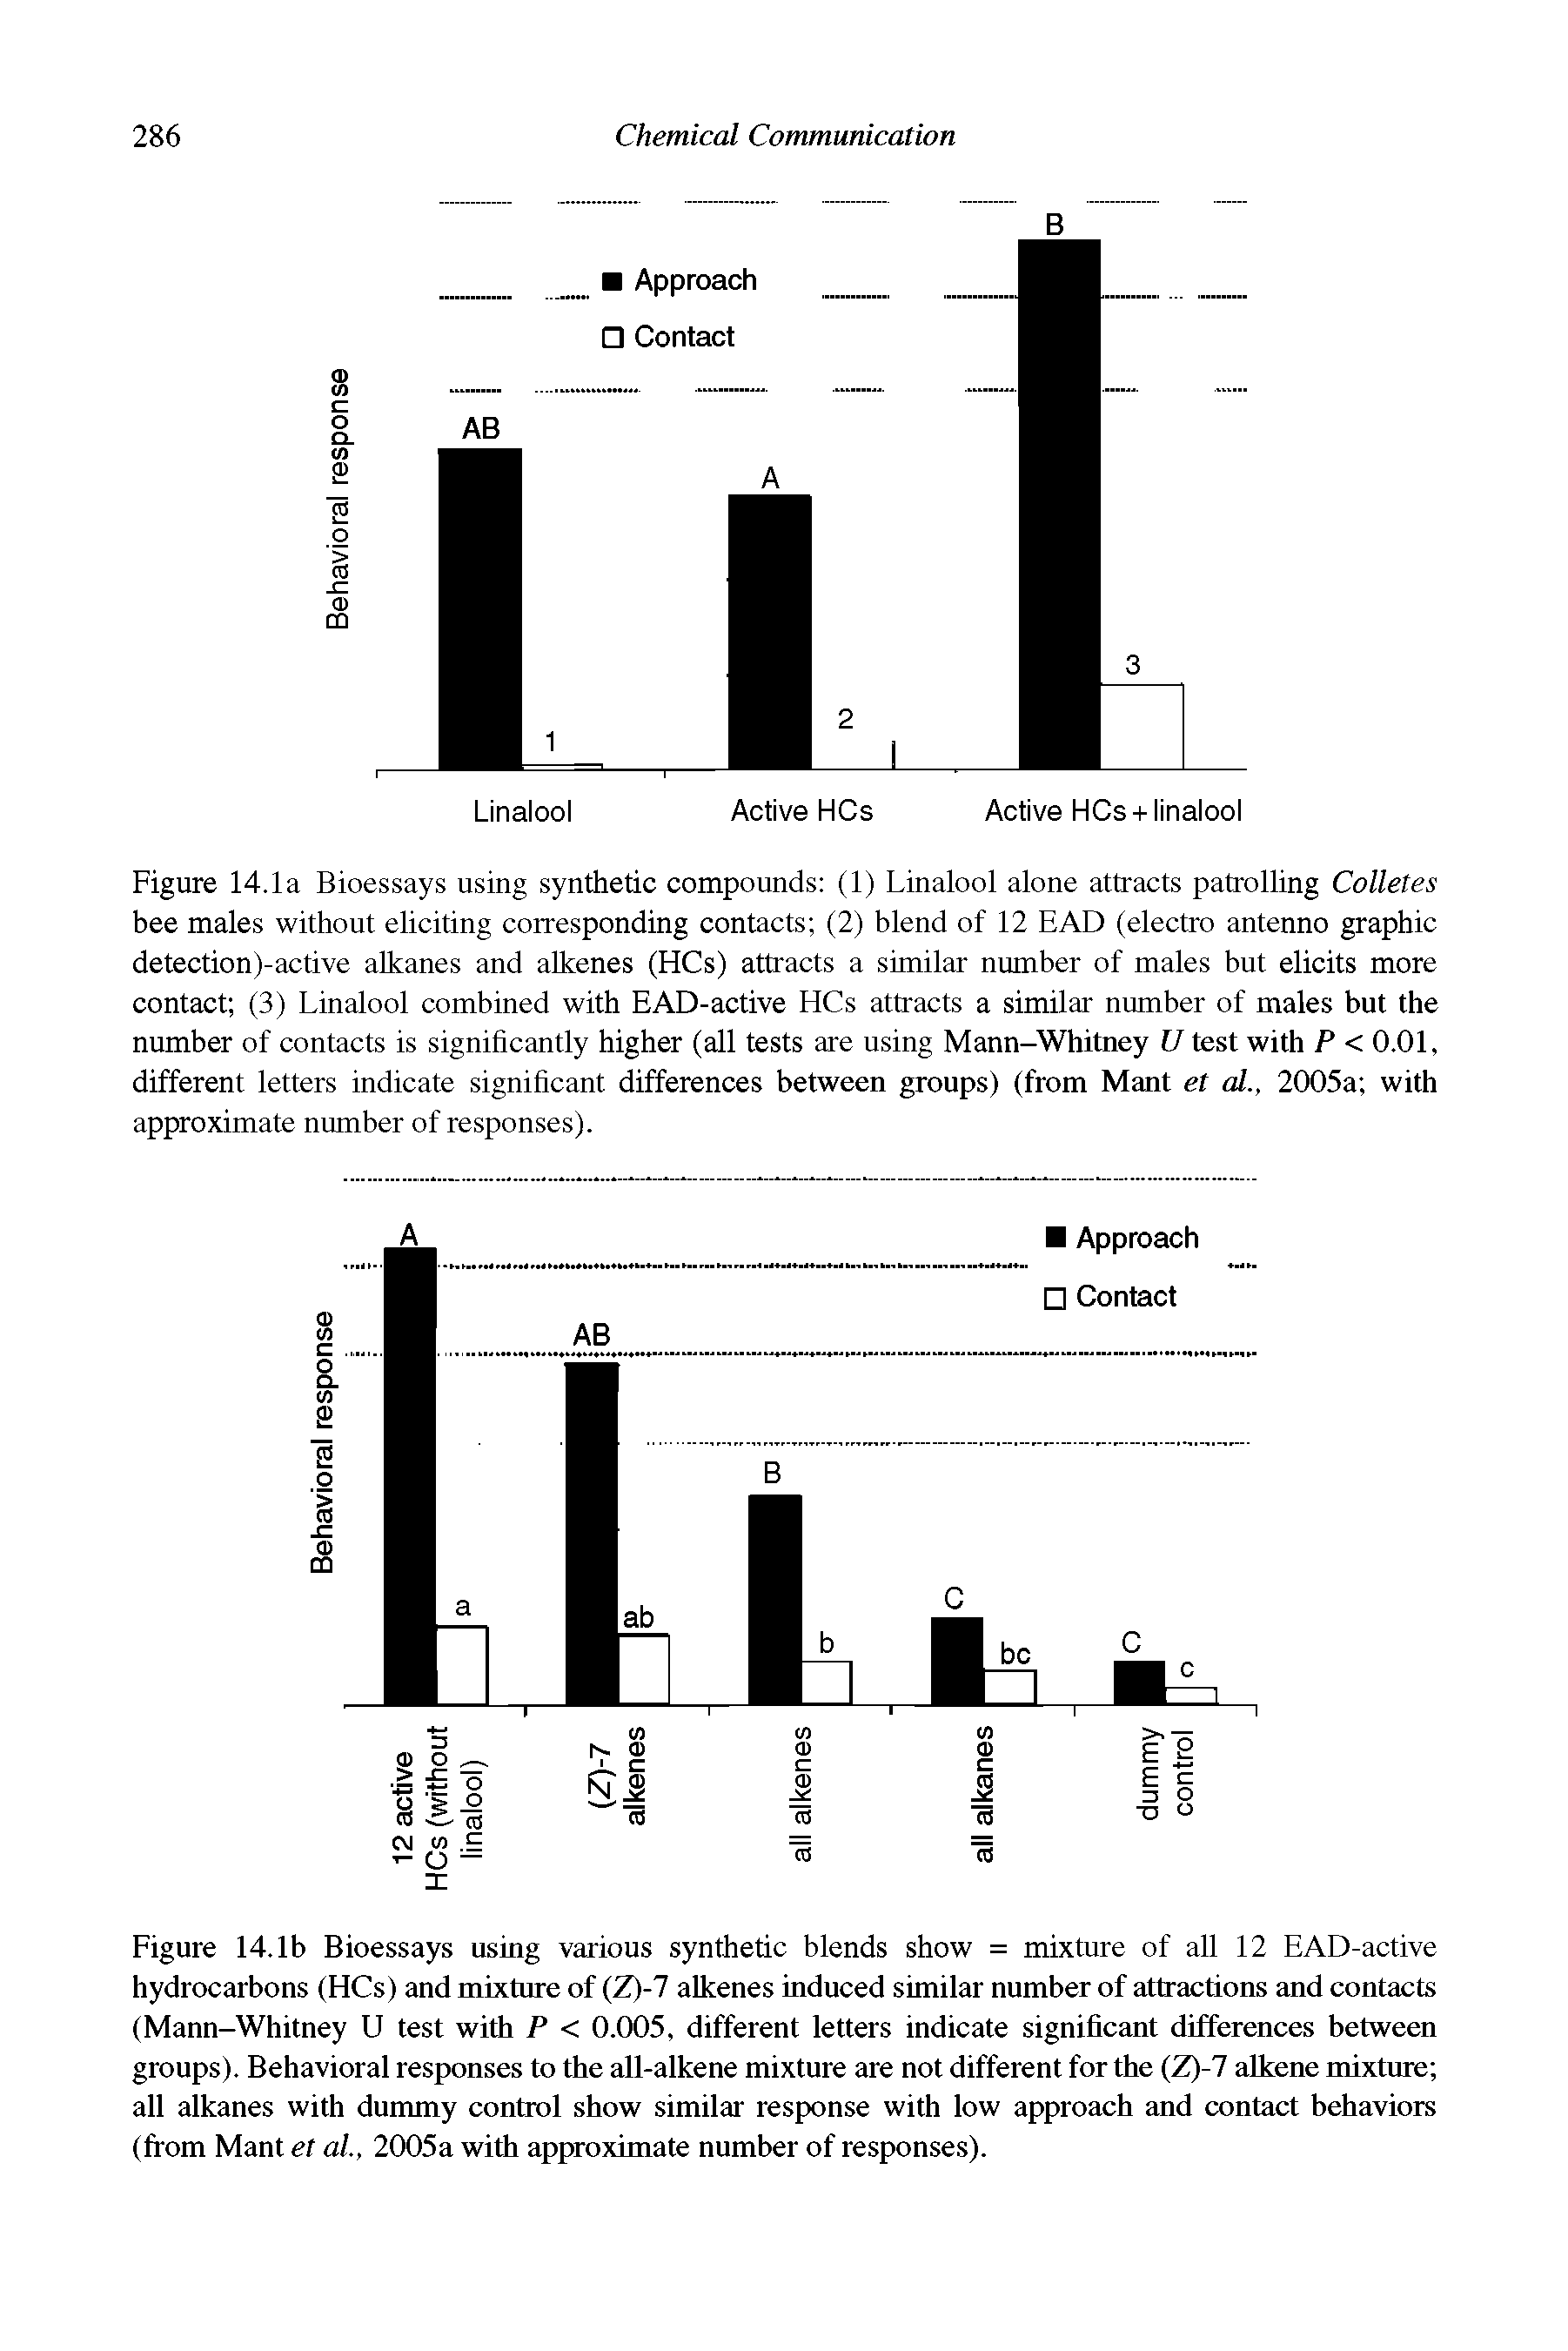 Figure 14.1b Bioessays using various synthetic blends show = mixture of all 12 EAD-active hydrocarbons (HCs) and mixture of (Z)-7 alkenes induced similar number of attractions and contacts (Mann-Whitney U test with P < 0.005, different letters indicate significant differences between groups). Behavioral responses to the all-alkene mixture are not different for the (Z)-7 alkene mixture all alkanes with dummy control show similar response with low approach and contact behaviors (from Mant et al., 2005a with approximate number of responses).